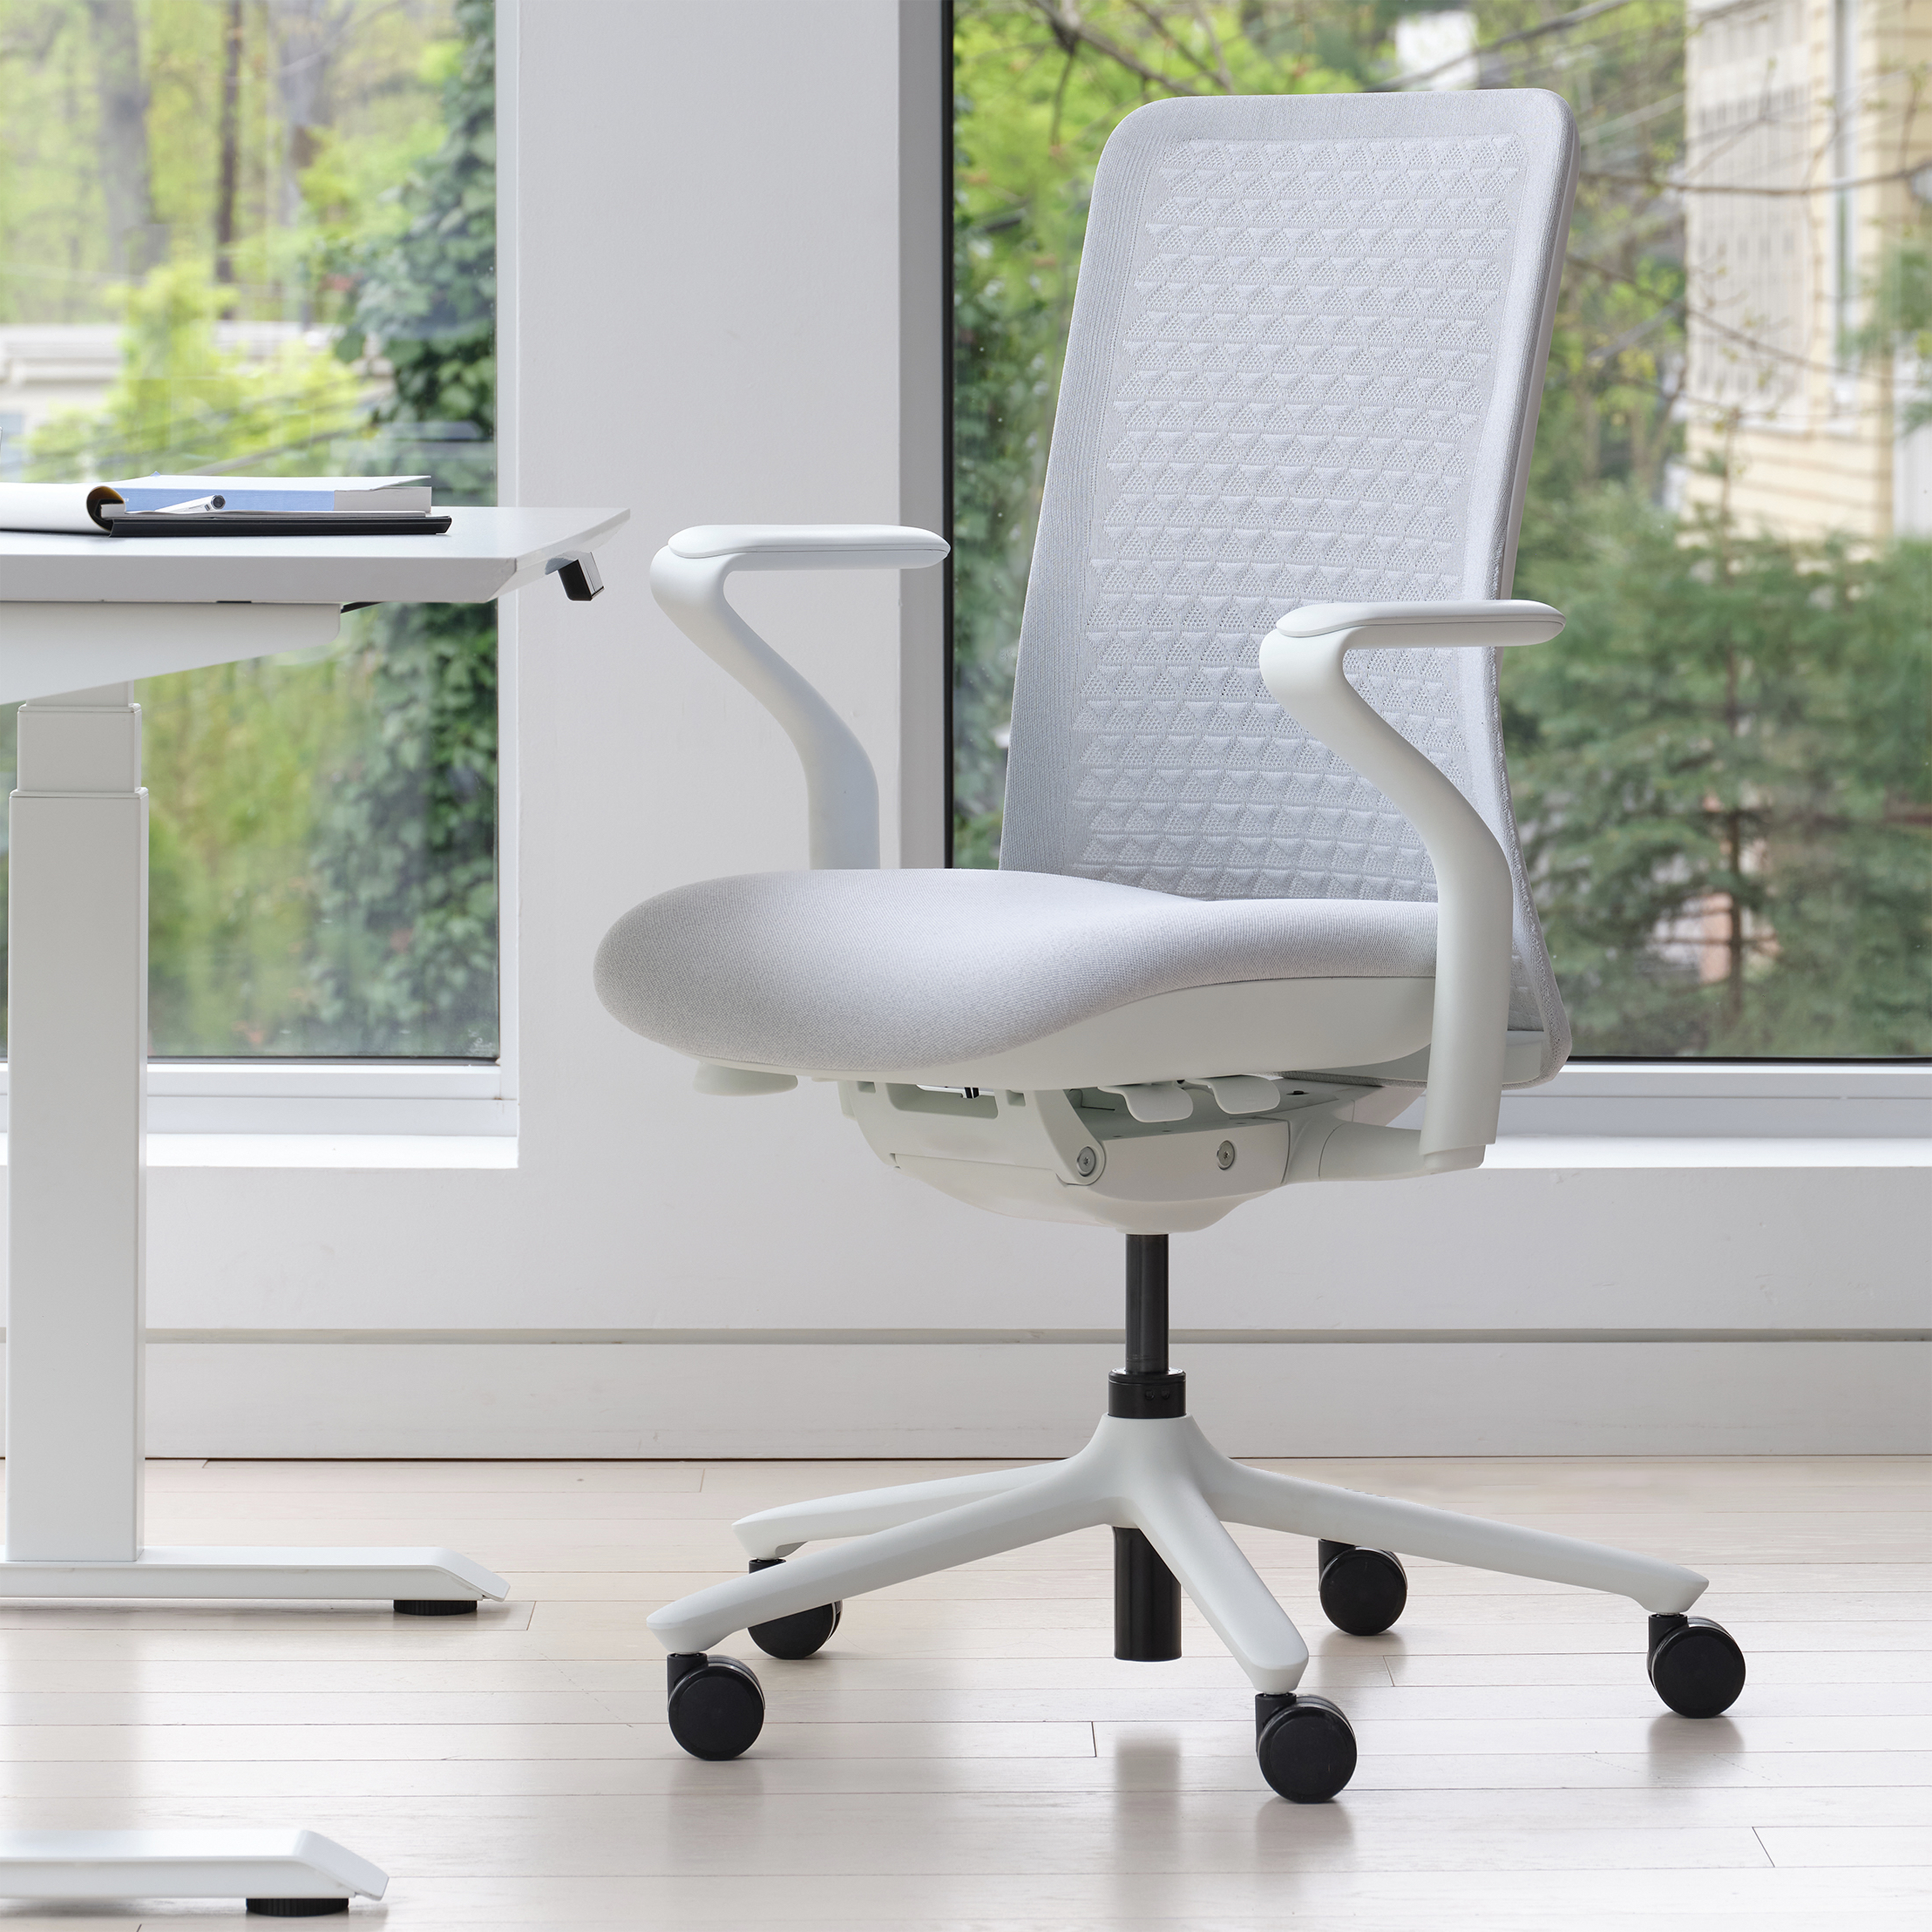 The front of a light grey-colored office chair inside a home office.